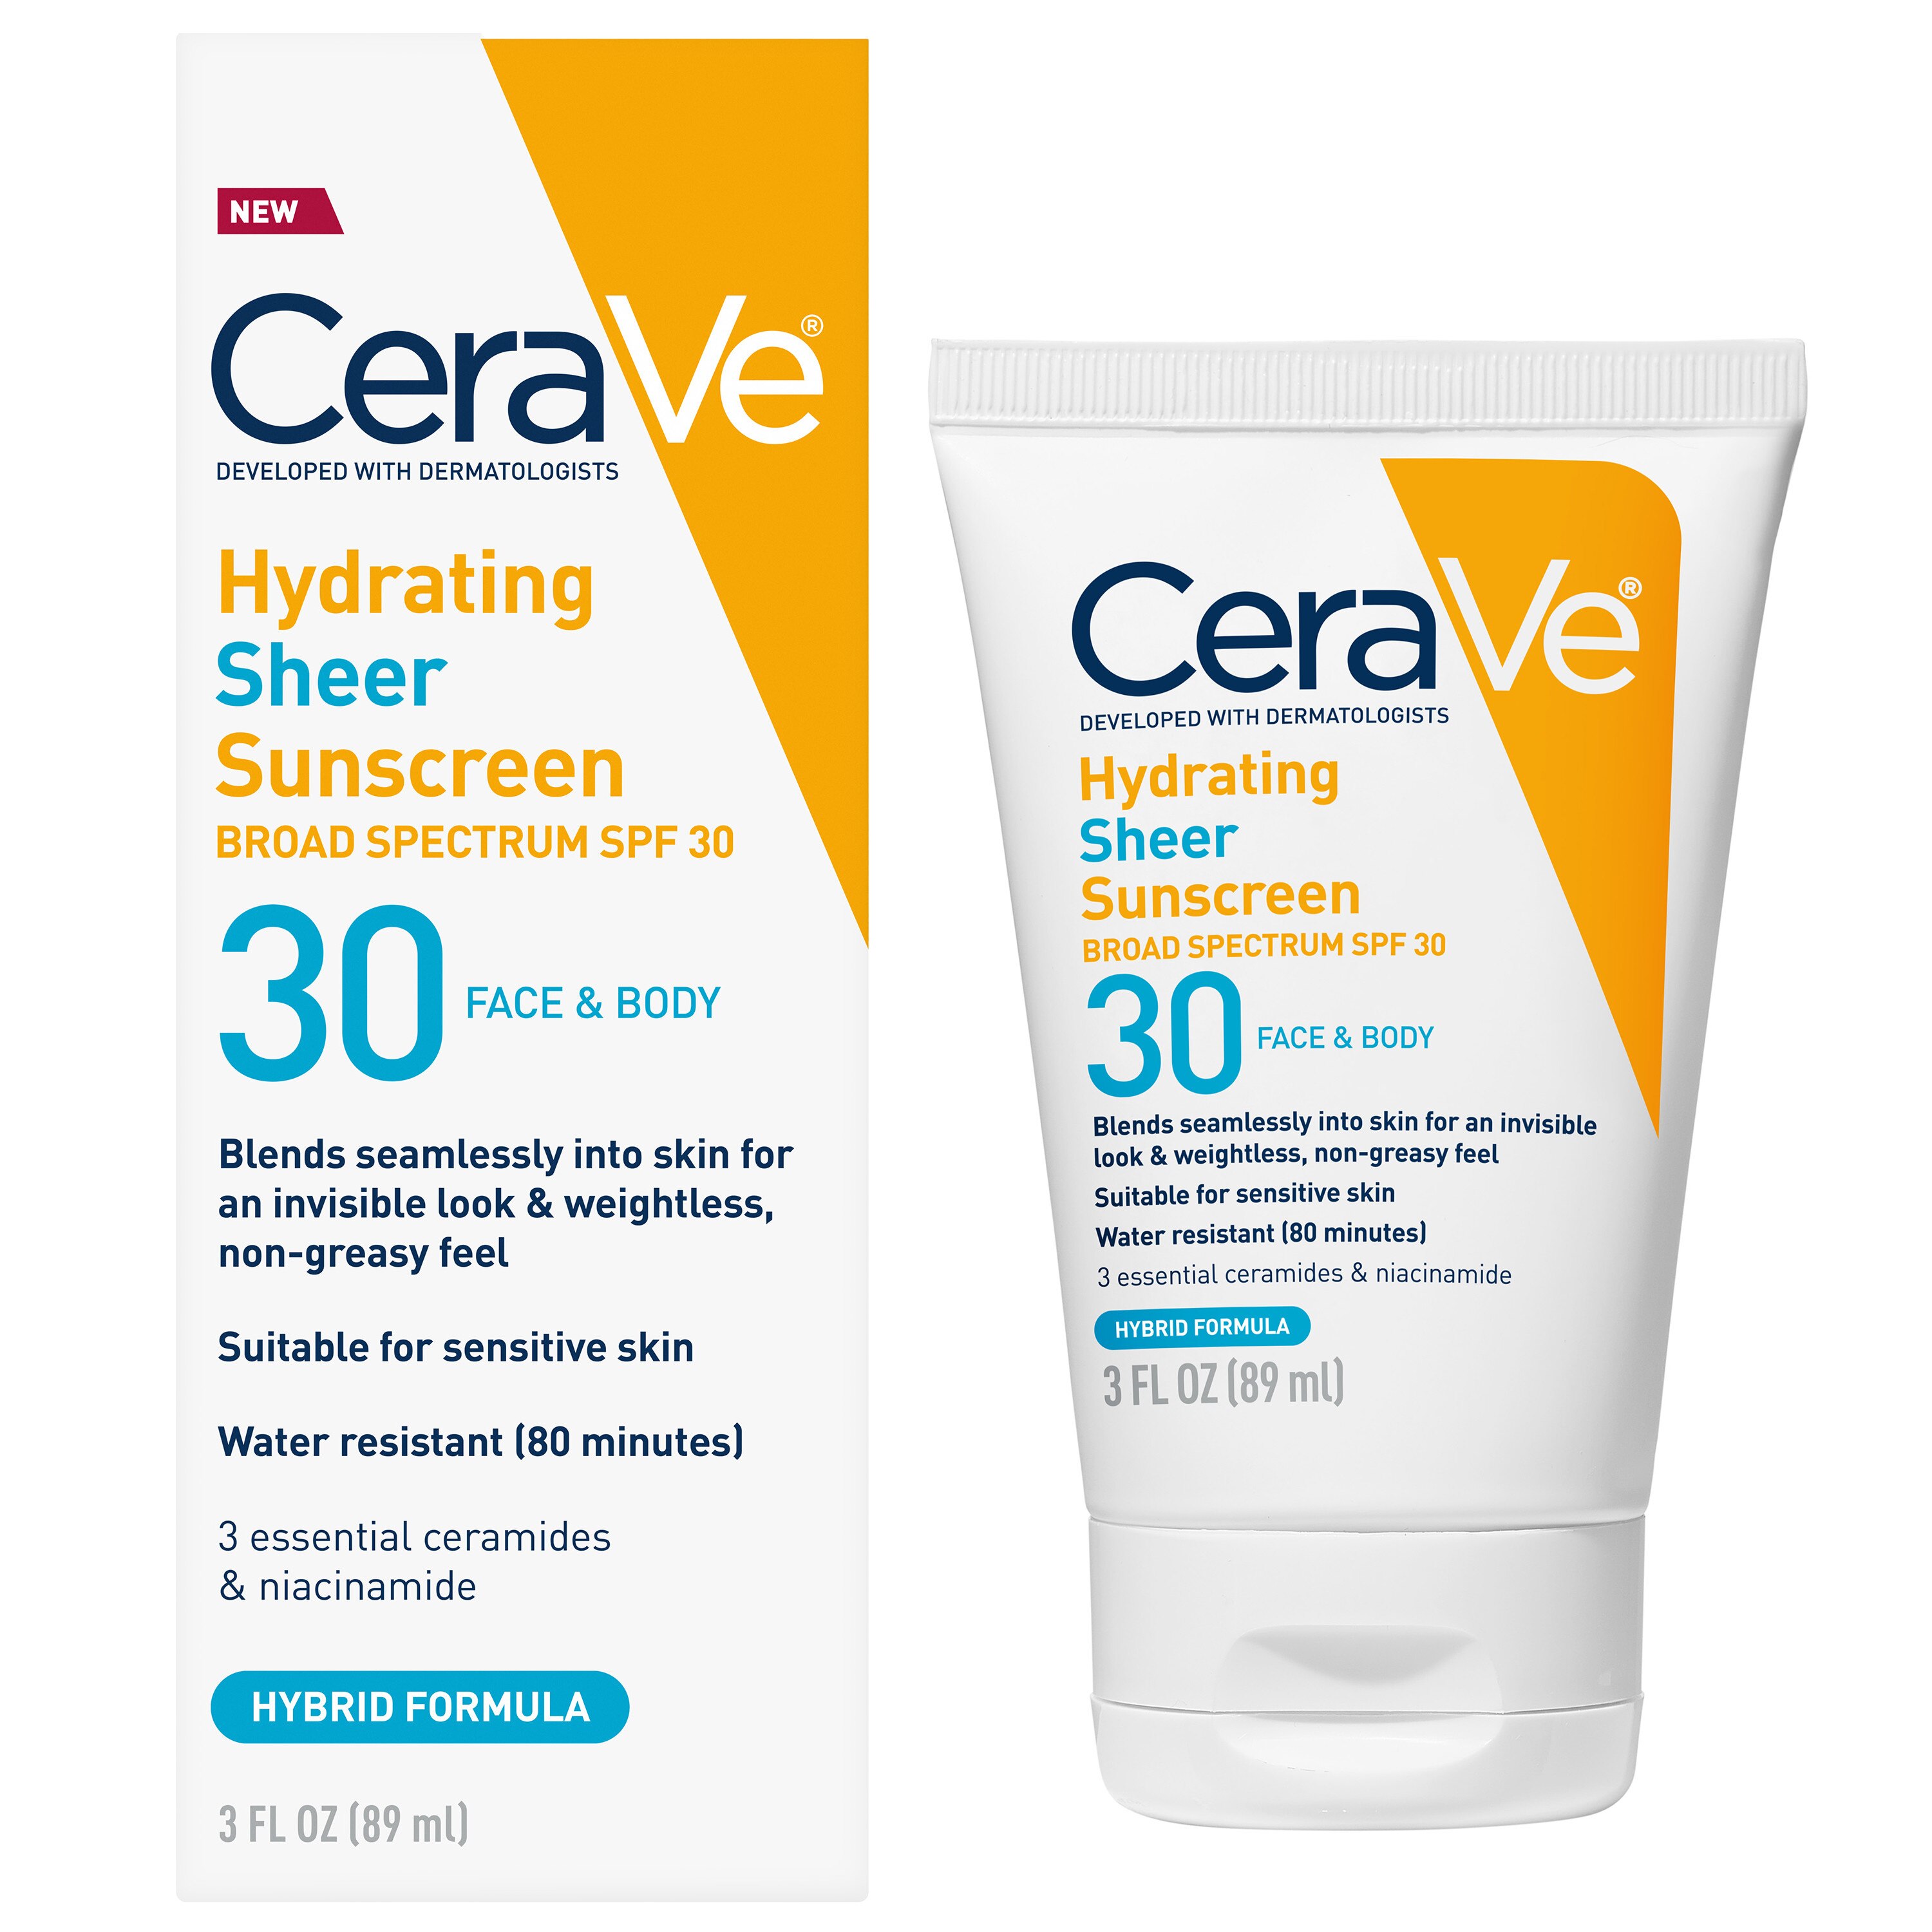 CeraVe Hydrating Sheer SPF 30 for and Body, Mineral & Chemical Sunscreen with Hyaluronic Niacinamides and Zinc Oxide, 3 oz | Pick Up In Store TODAY at CVS